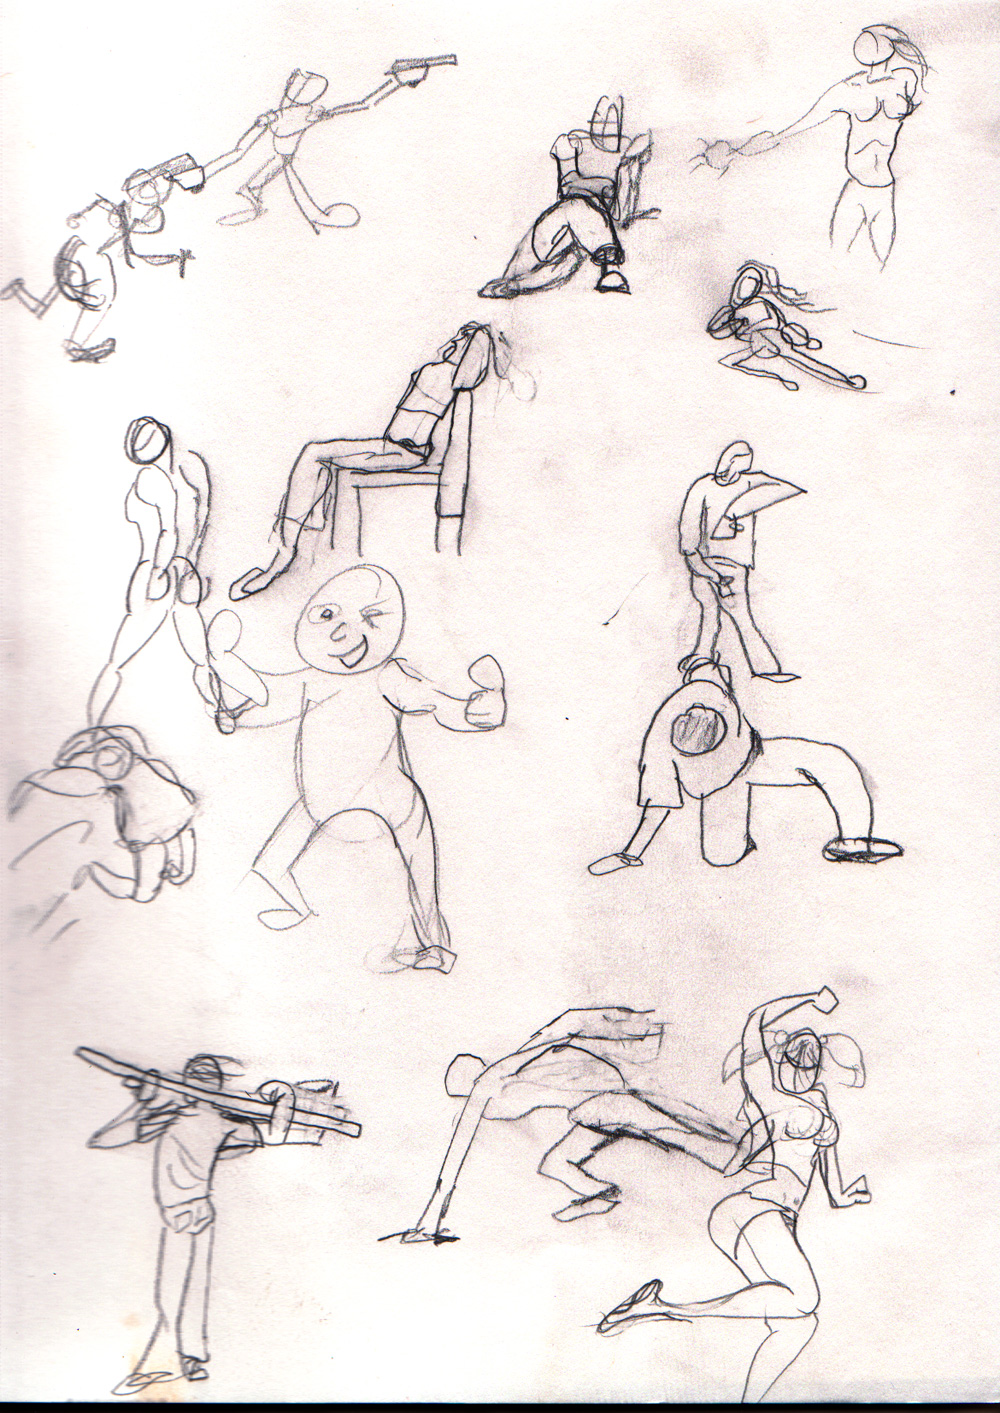 July_13th_2009_sketches_by_dlpwillywonka.jpg